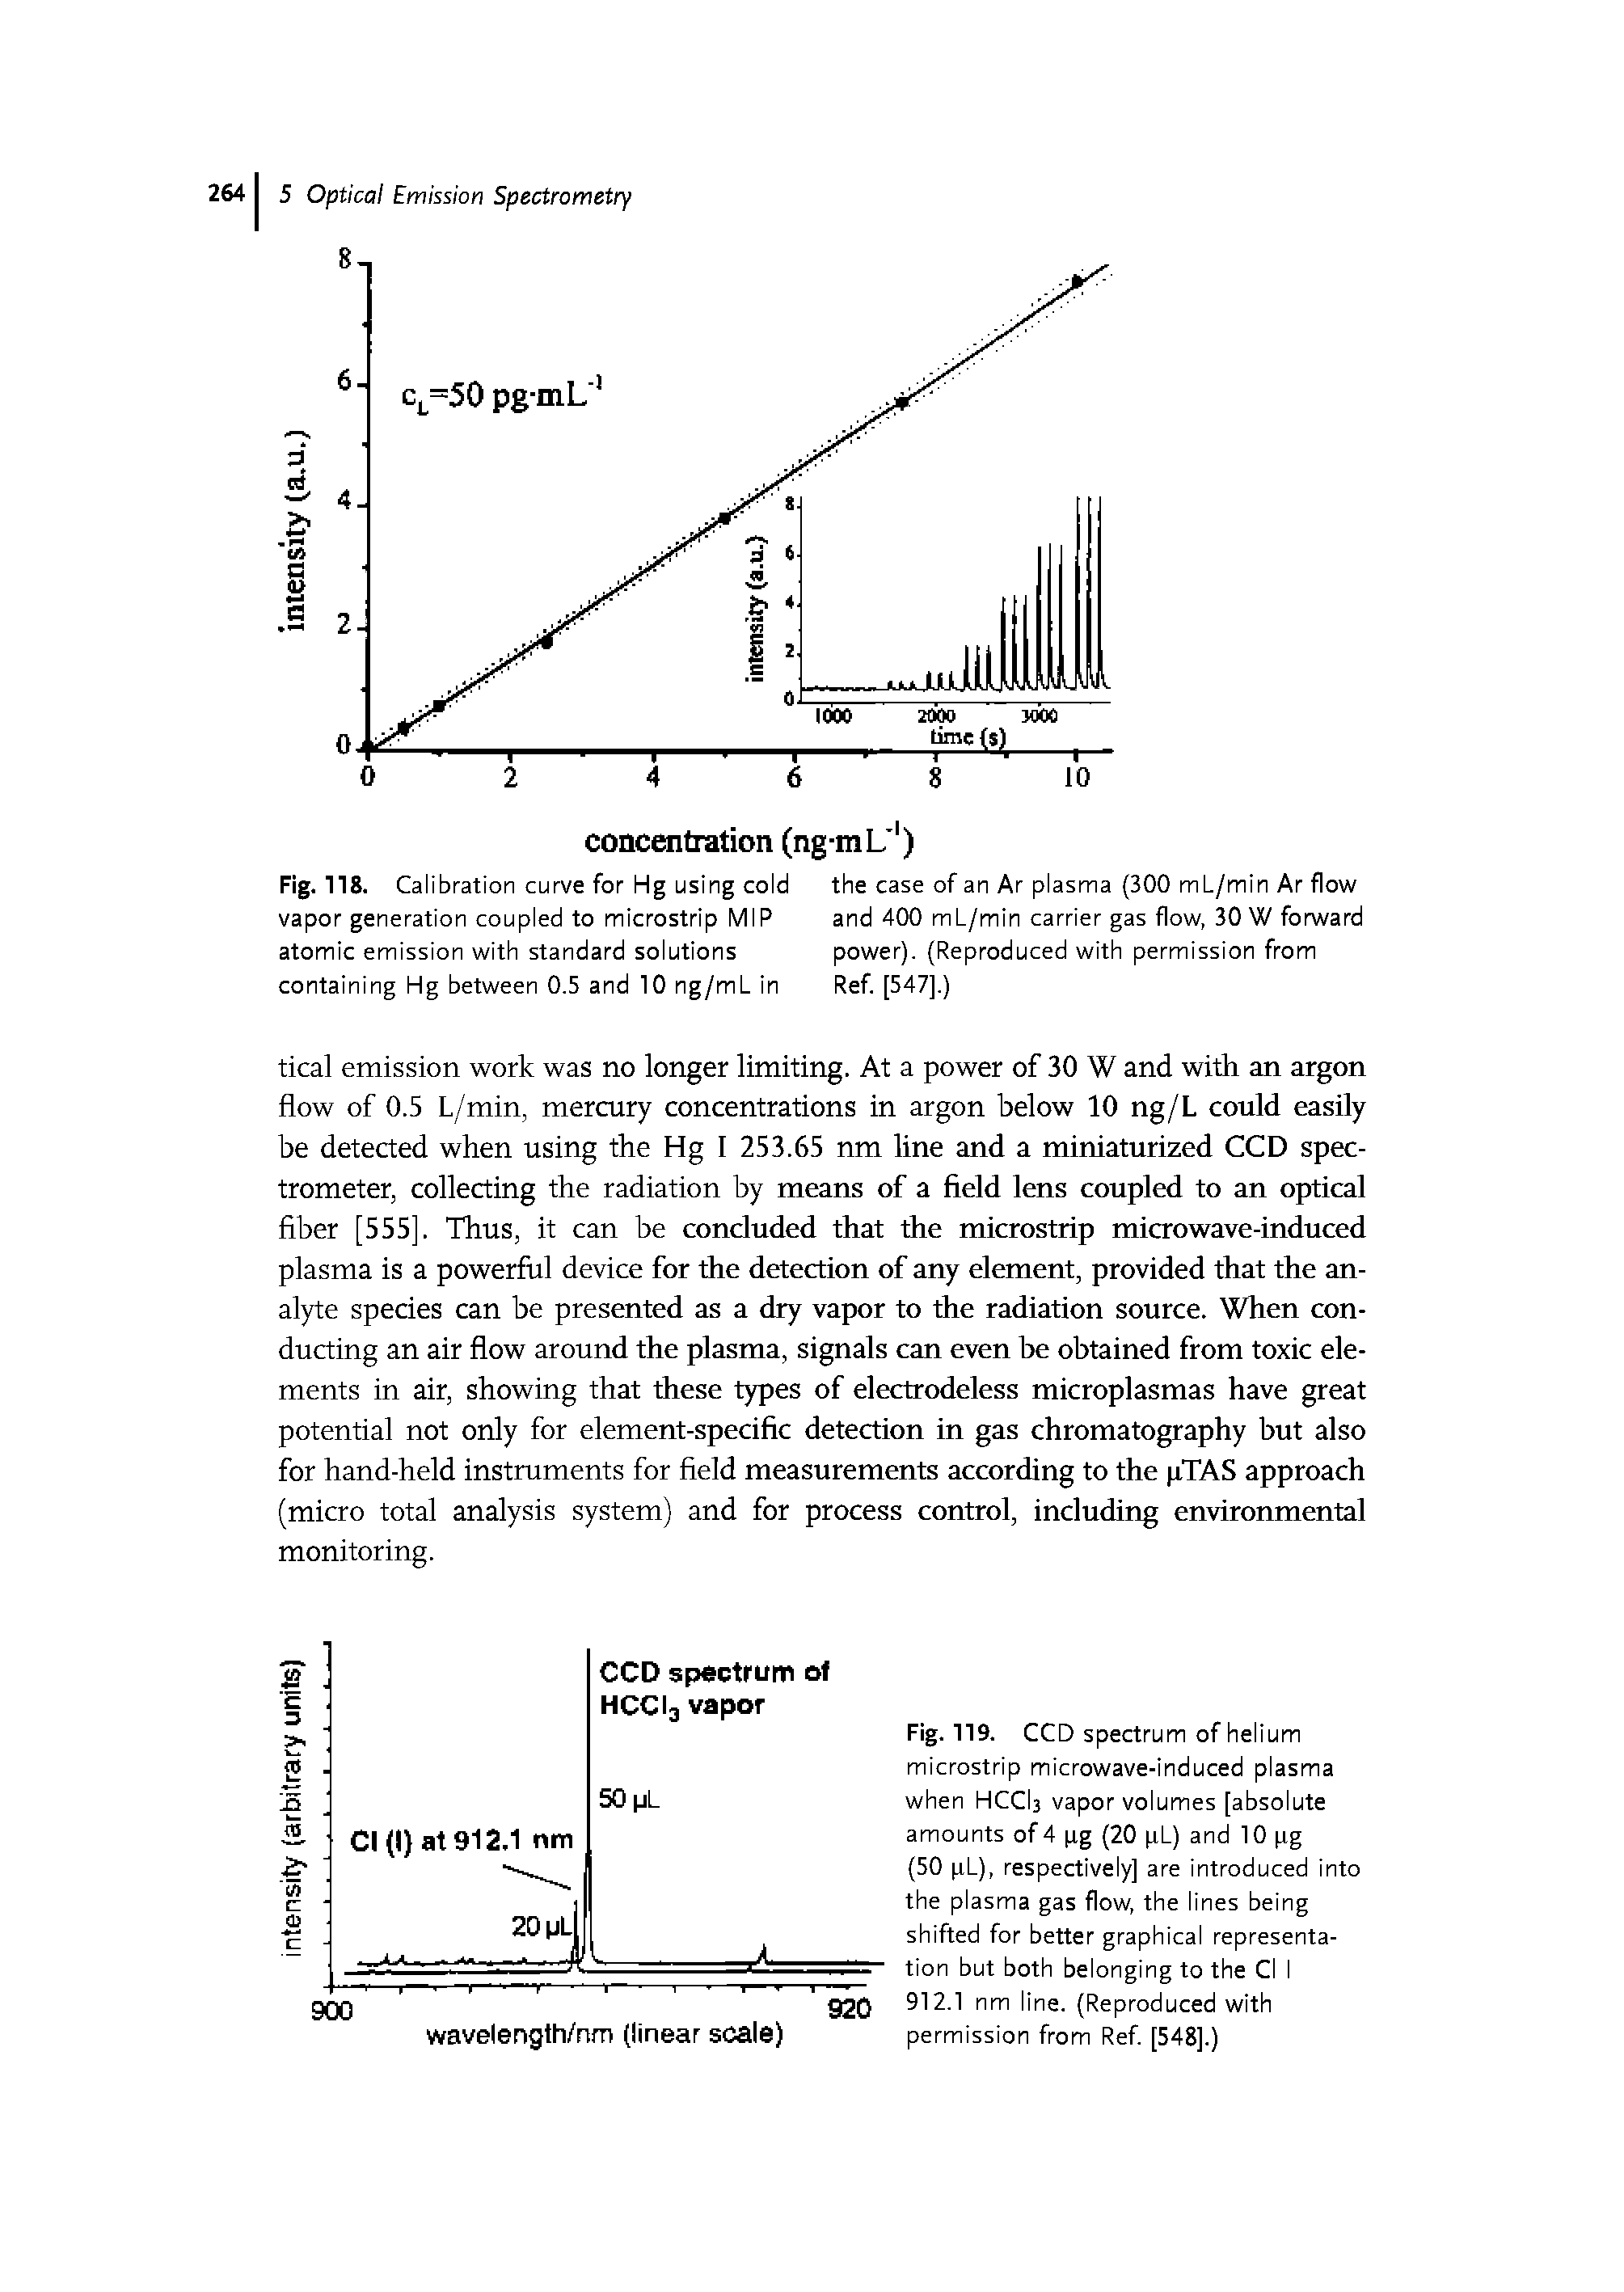 Fig. 119. CCD spectrum of helium microstrip microwave-induced plasma when HCCb vapor volumes [absolute amounts of 4 pg (20 pL) and 10 pg (50 pL), respectively] are introduced into the plasma gas flow, the lines being shifted for better graphical representation but both belonging to the Cl I 912.1 nm line. (Reproduced with permission from Ref. [548].)...